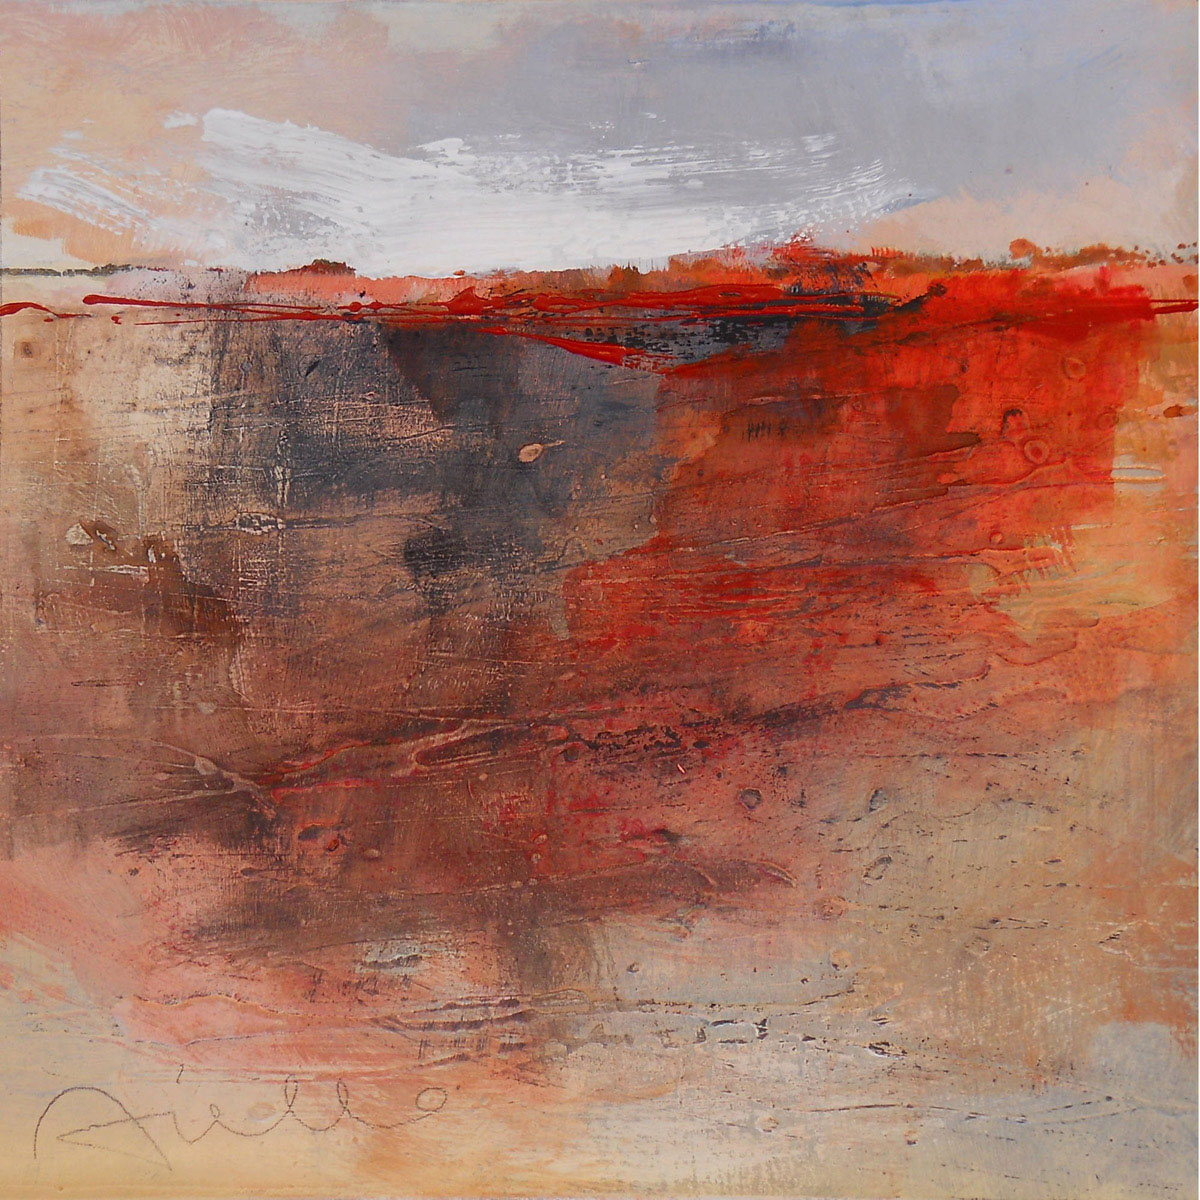 Paesaggio in rosso, Red Landscape, acrylic on canvas, paintings of abstract landscapes by Sergio Aiello contemporary artist at sergioaiello.com